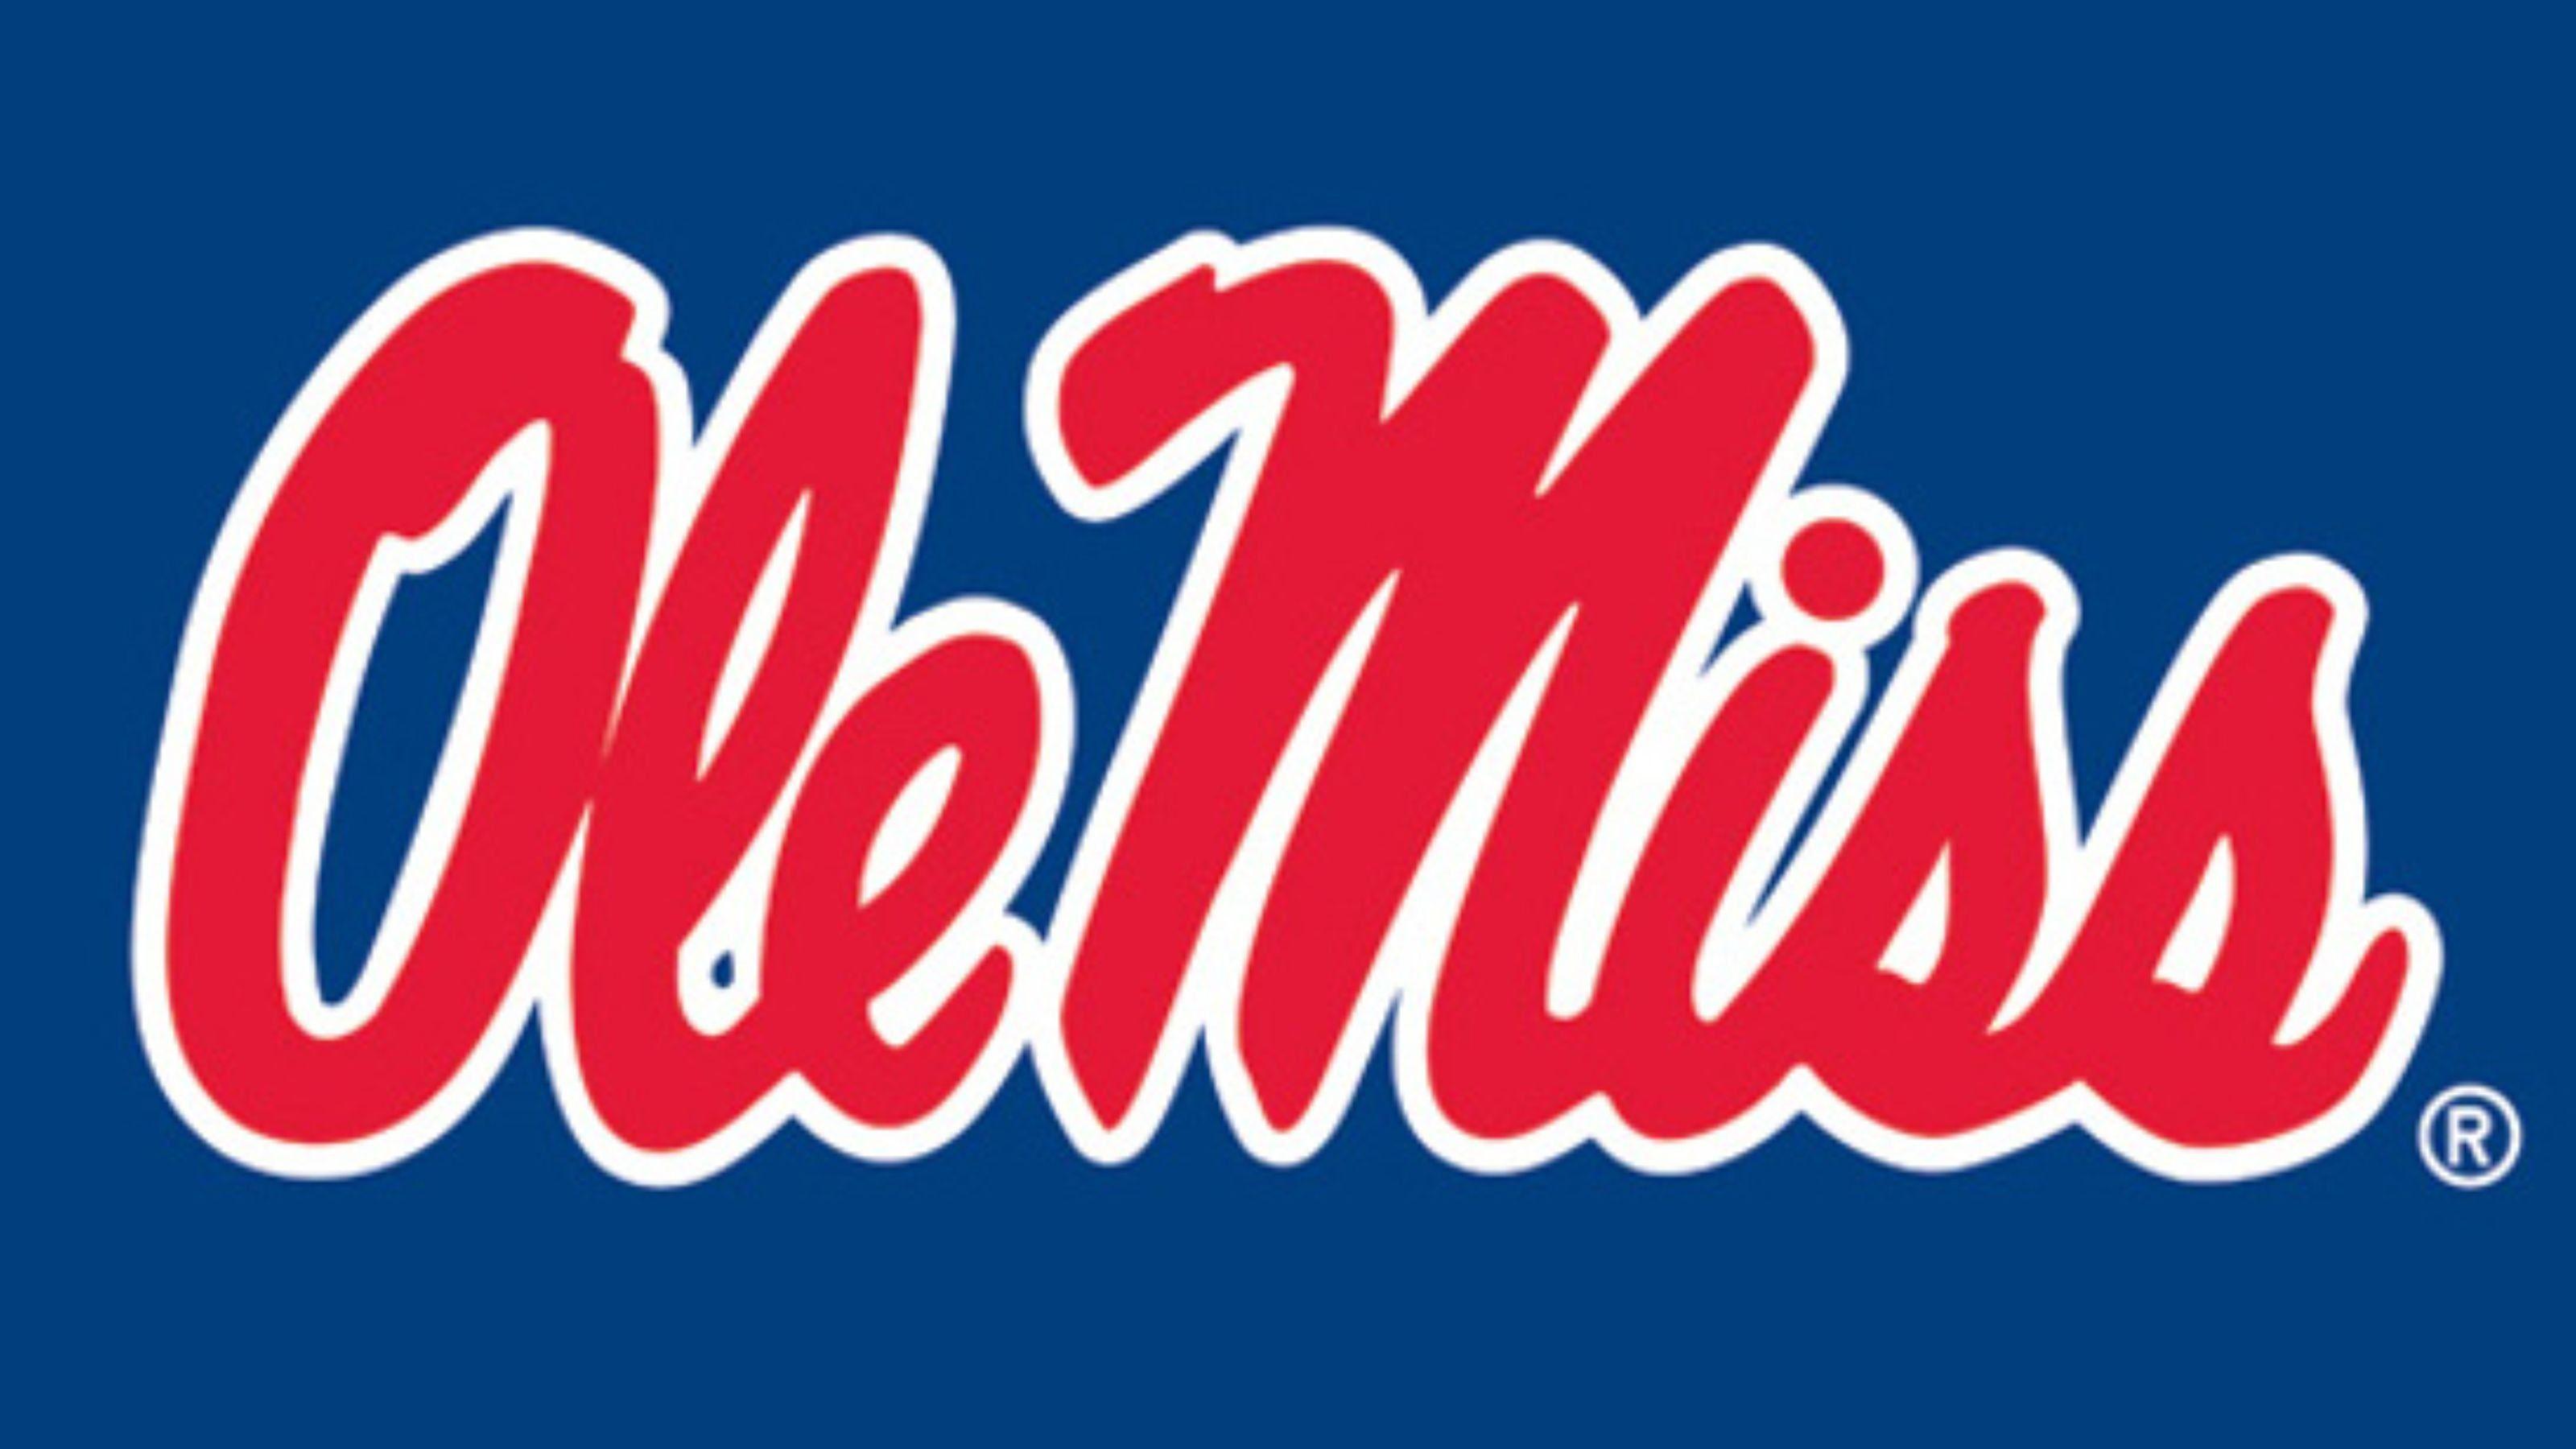 Ole Miss Wallpaper for iPhone